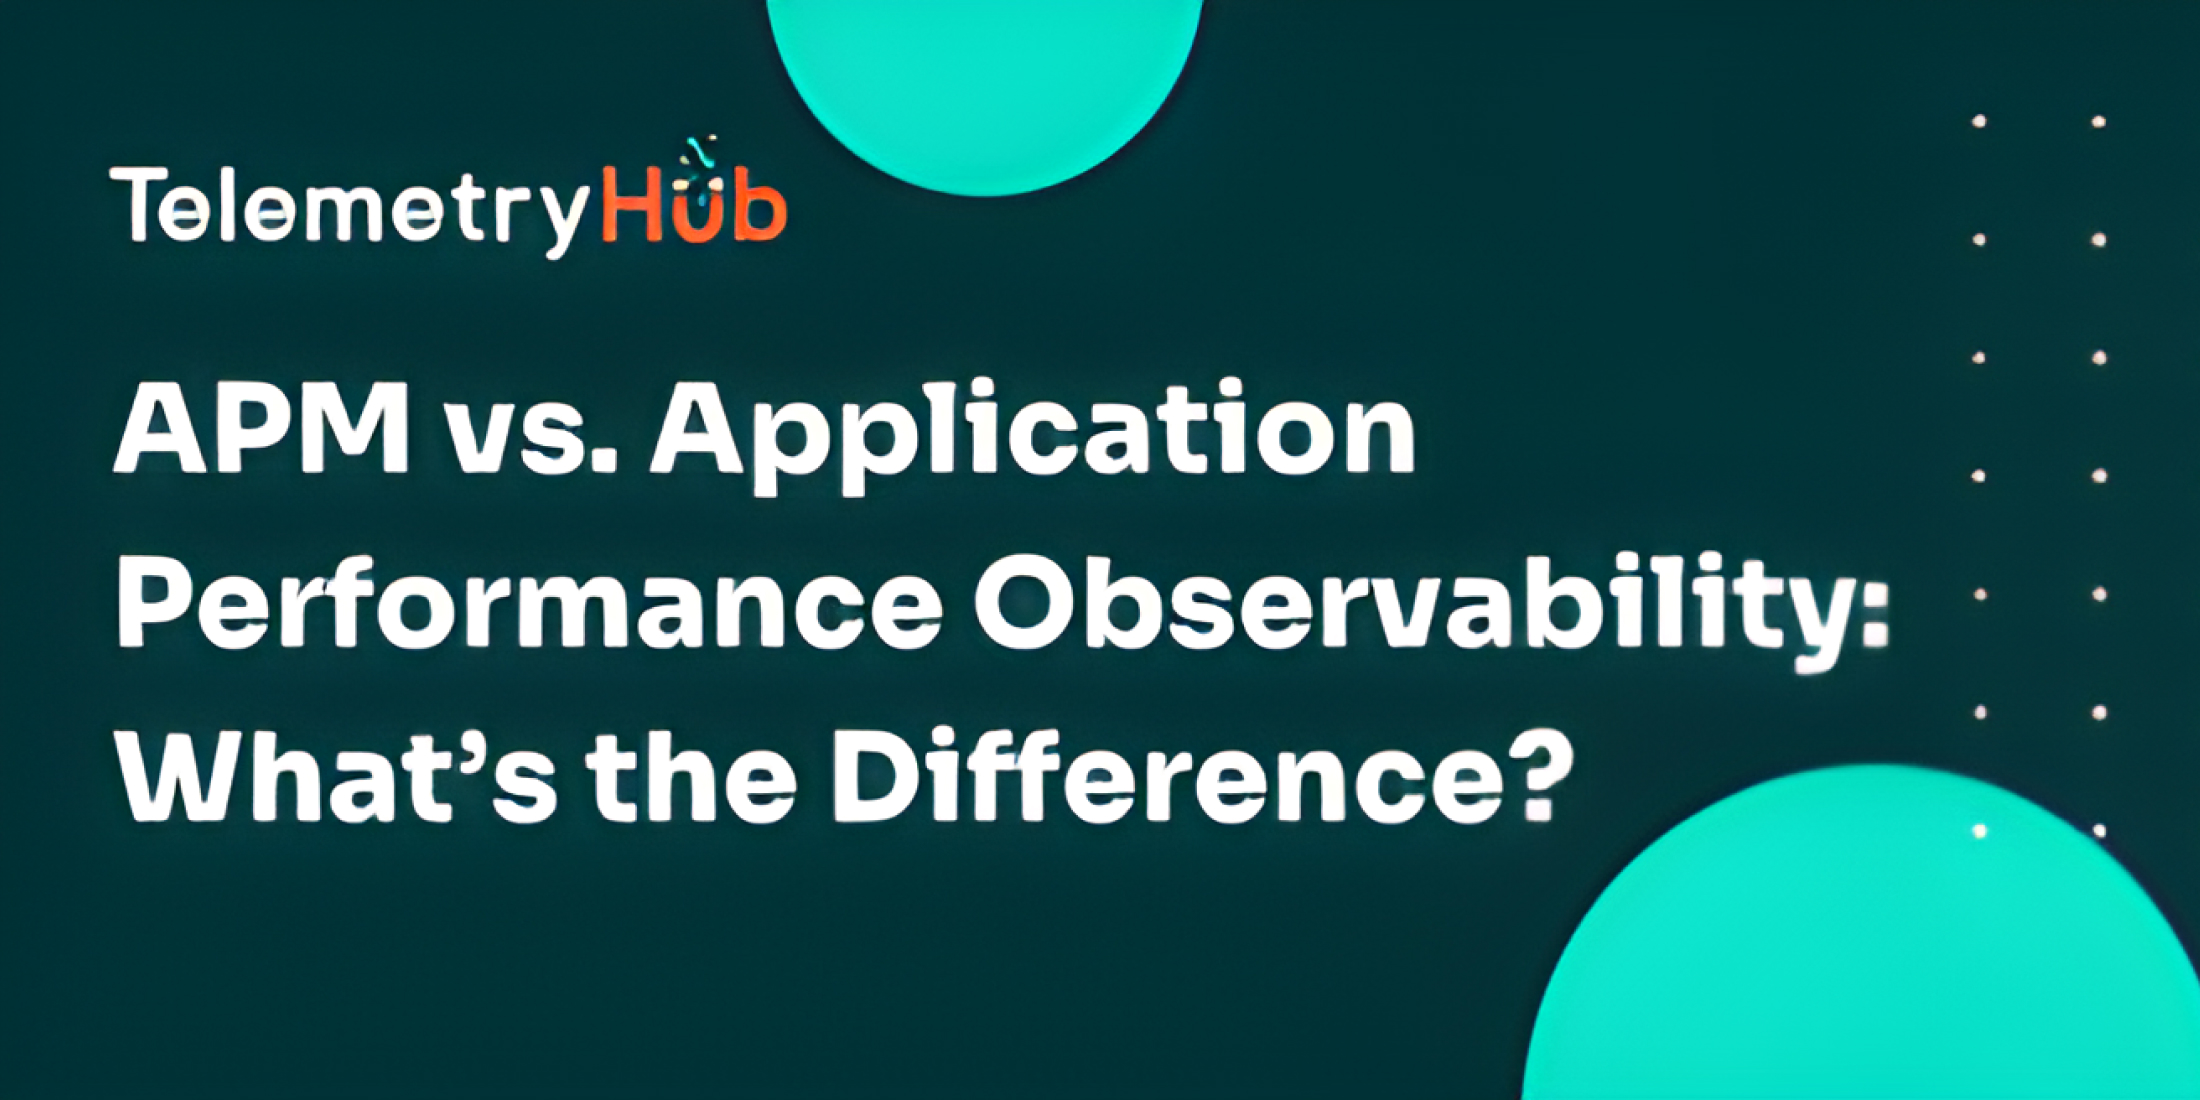 APM vs. Application Performance Observability - What’s the Difference image